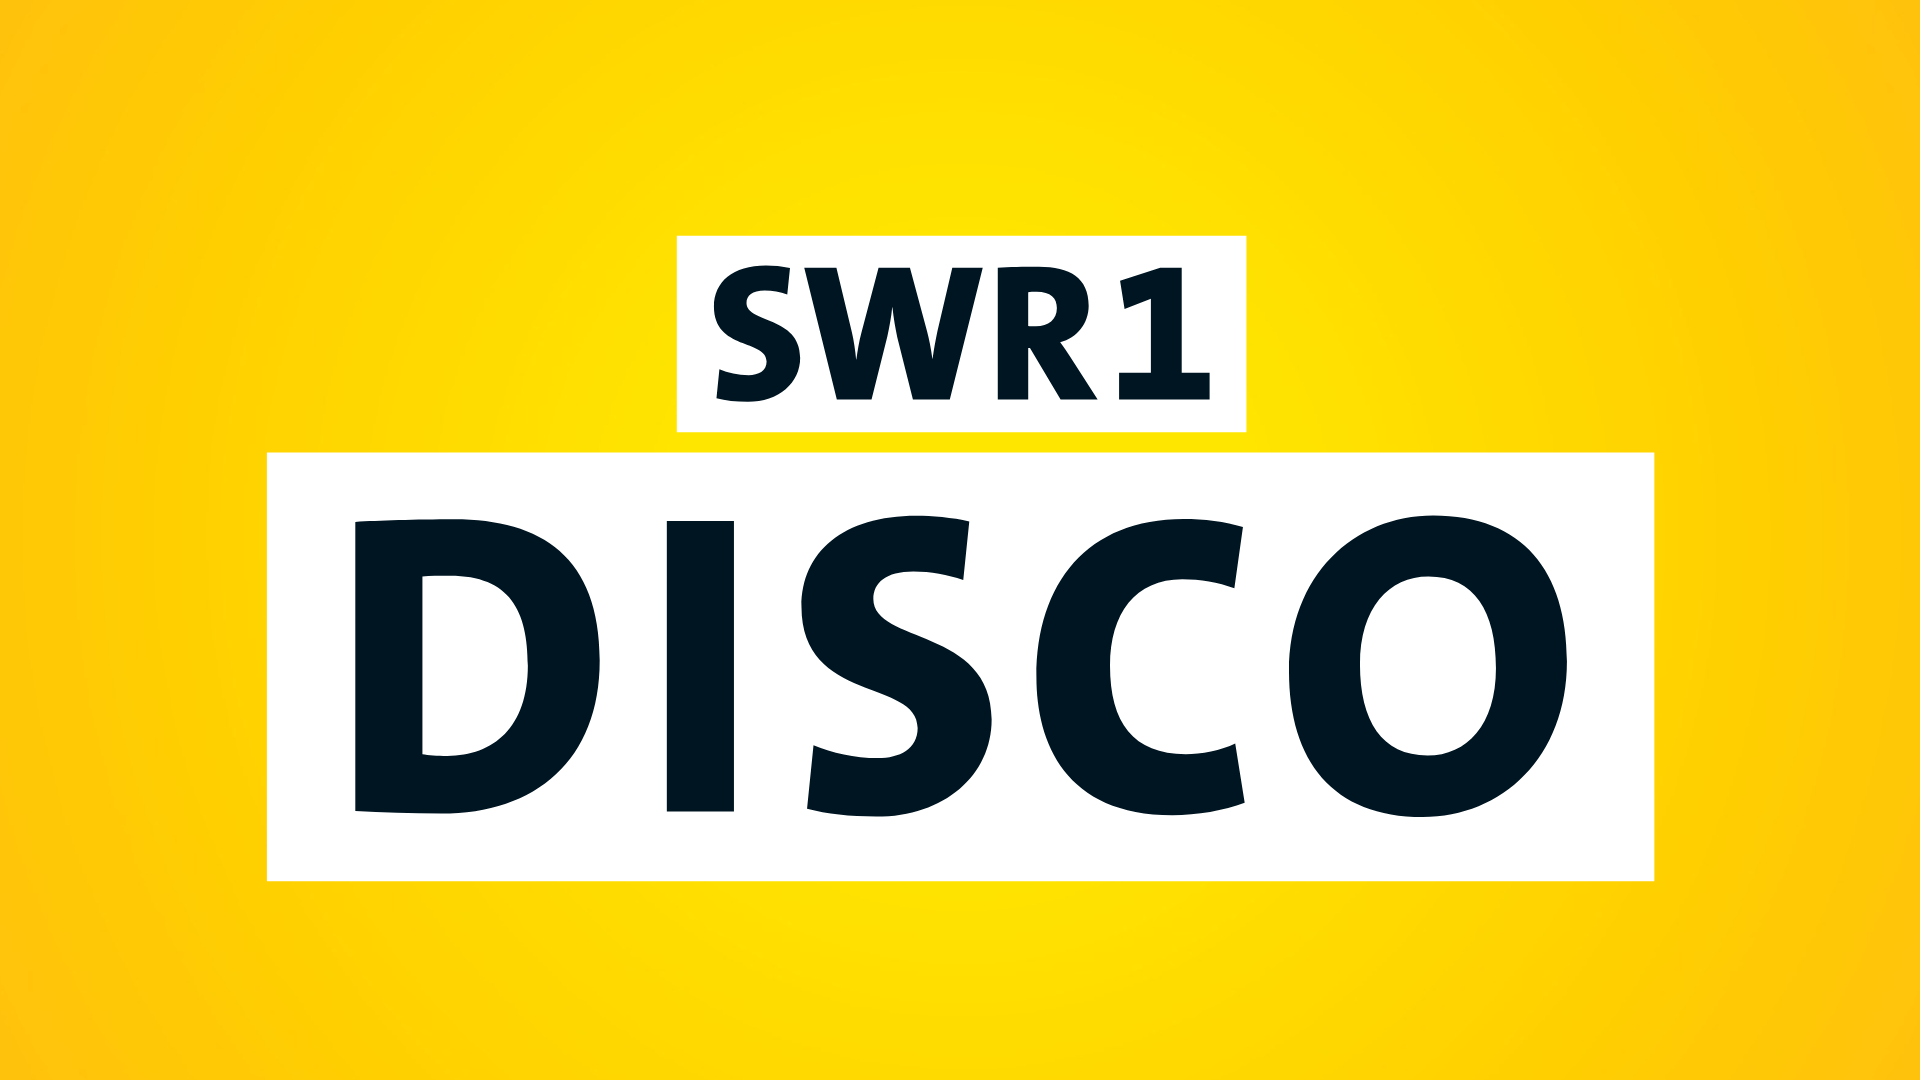 SWR1 Disco.png